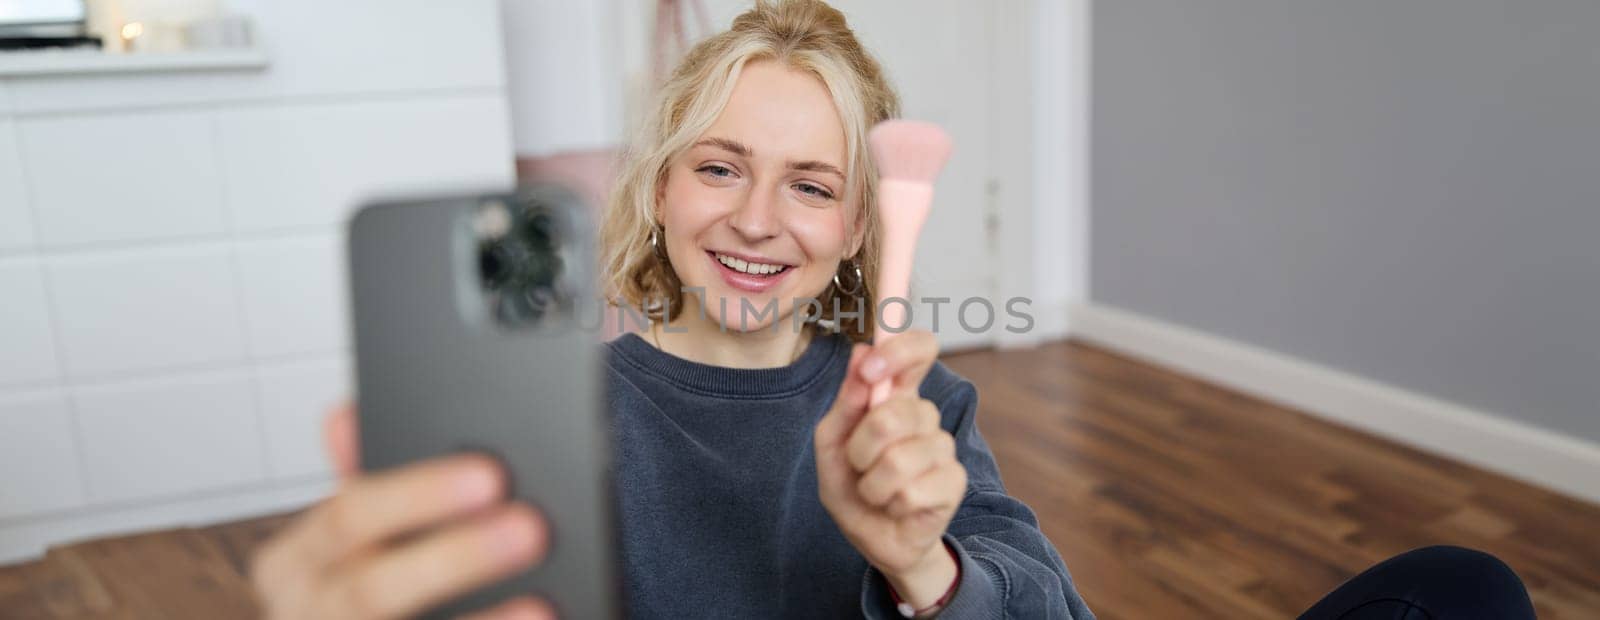 Image of stylish young woman, social media influencer, taking pictures on mobile phone, doing makeup tutorial for followers online, recording video vlog in her bedroom, showing brush.